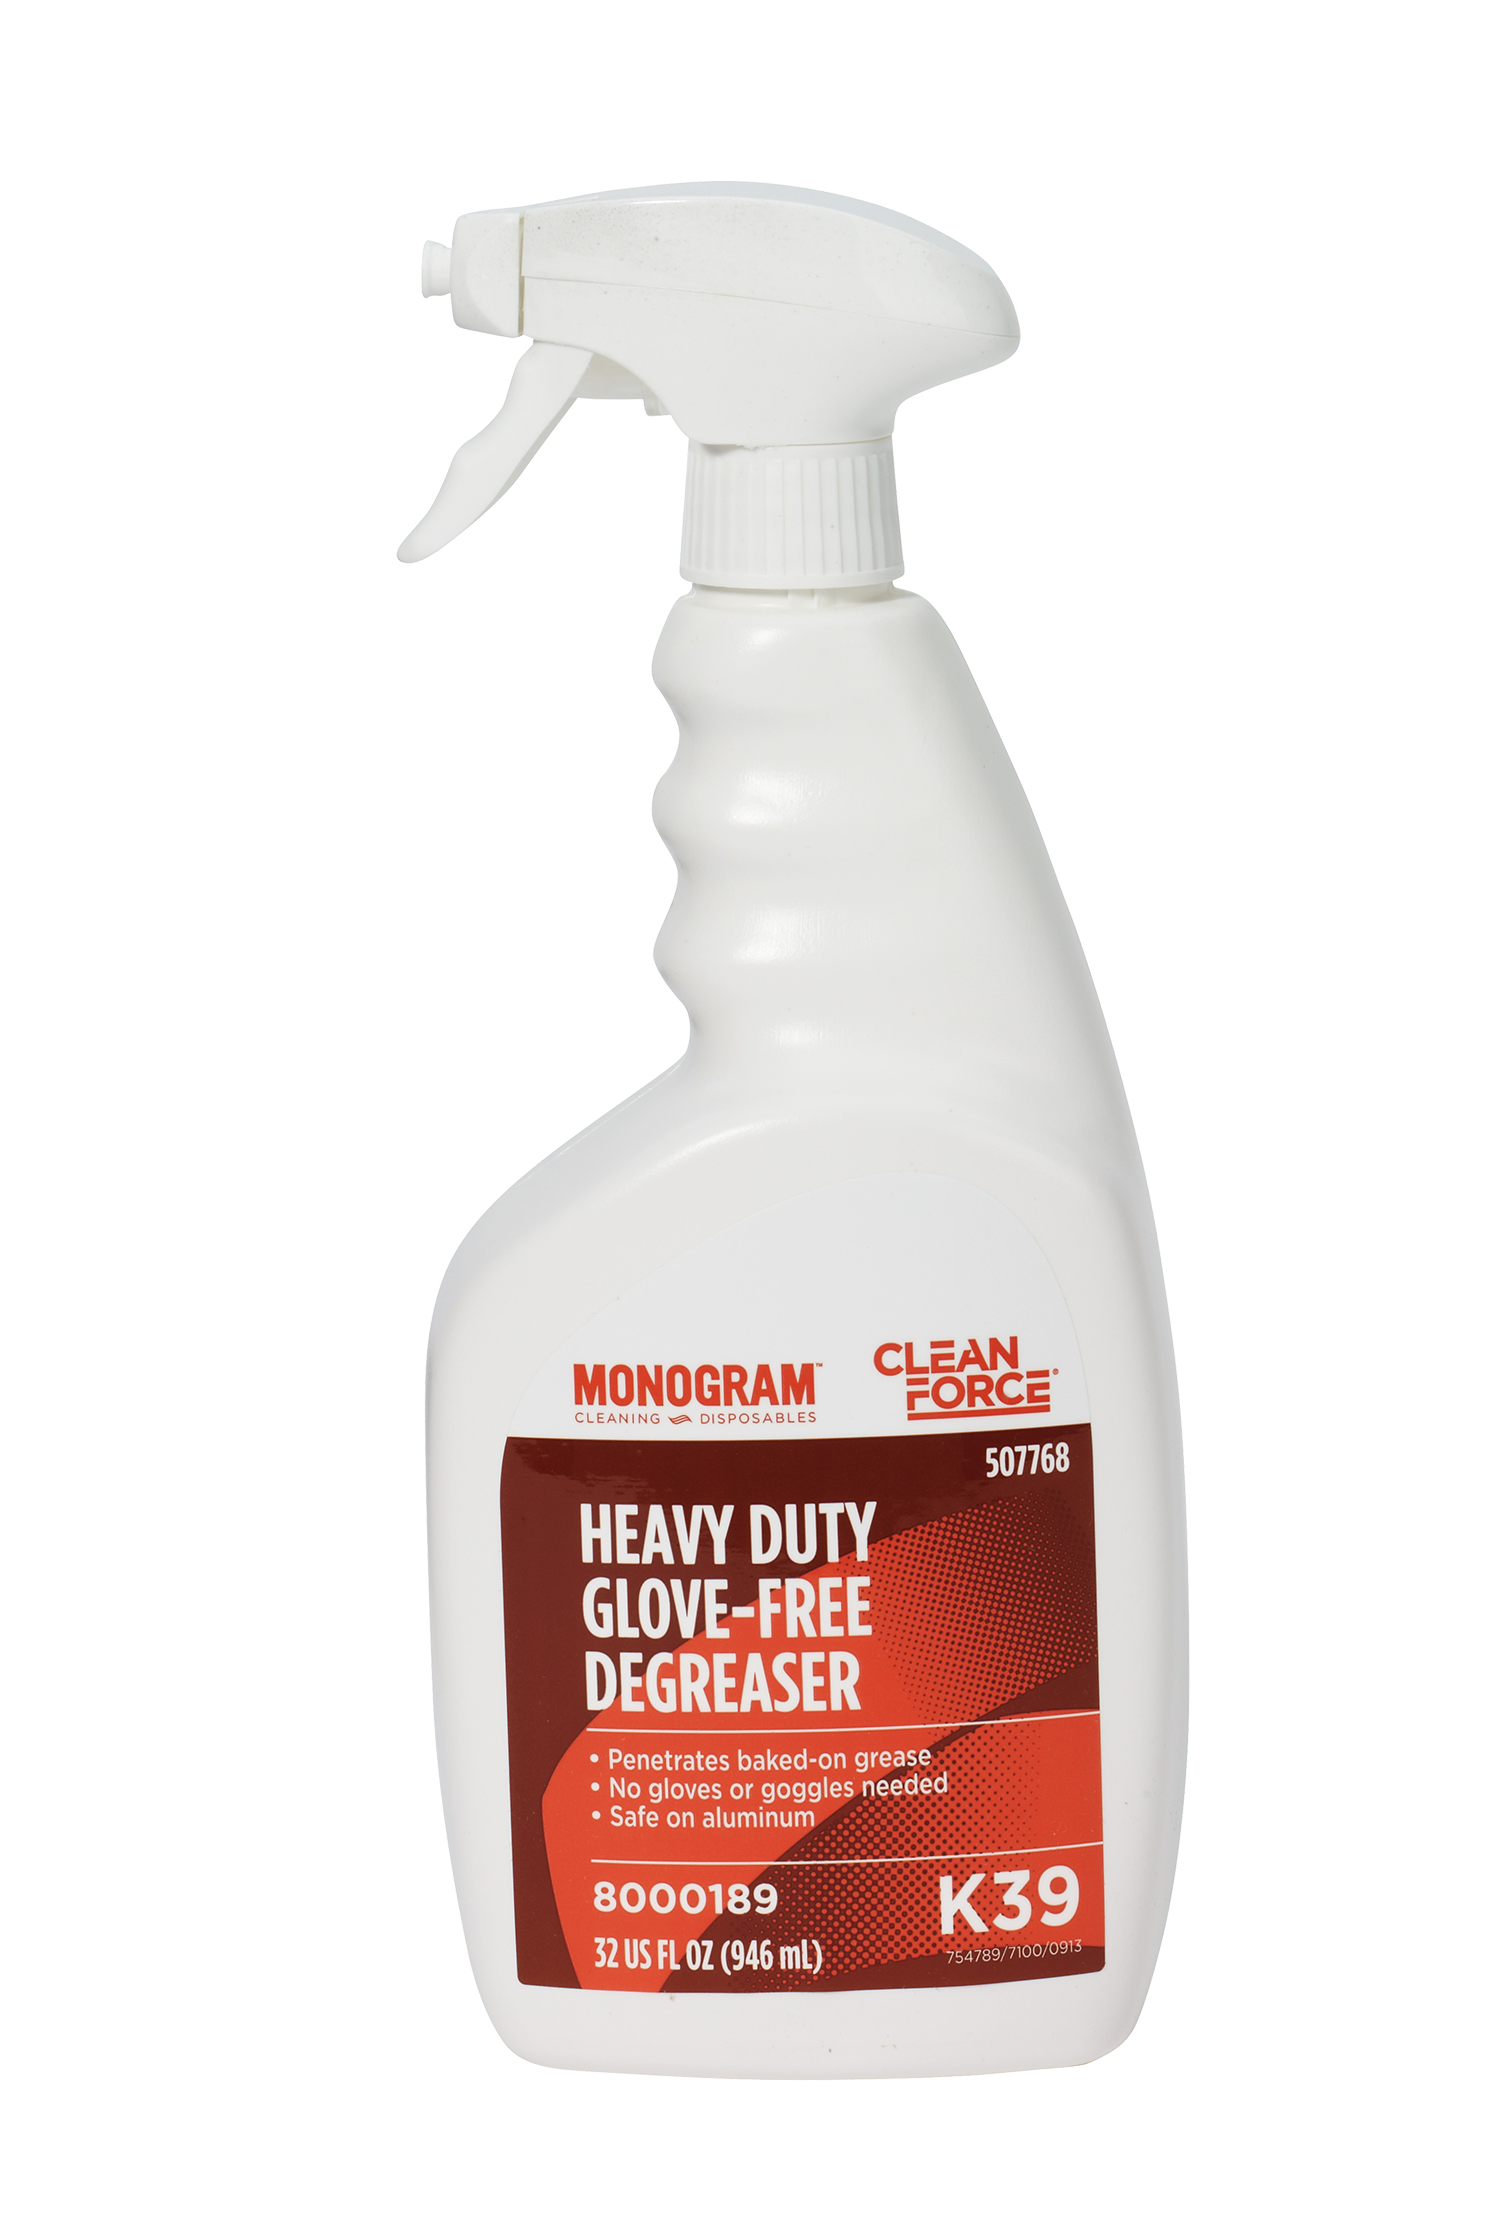 https://www.monogramcleanforce.com/-/media/Monogram/Images/ProductImages/Monogram-Clean-Force-Heavy-Duty-Glove-Free-Degreaser/8000189-CF-Heavy-Duty-Glove-Free-Degreaser.ashx